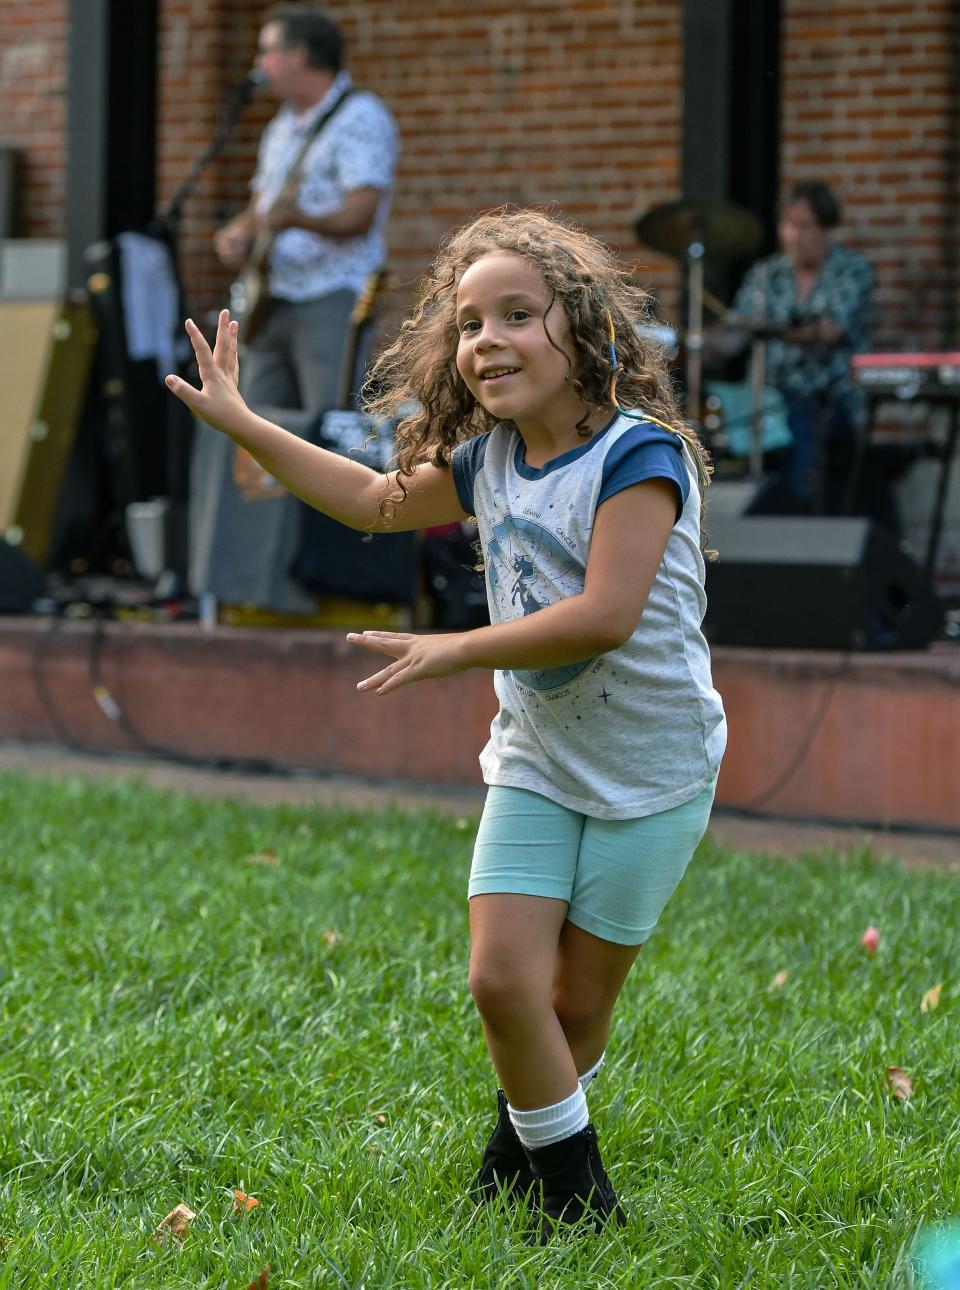 Layla Burns, 5, of Hagerstown dances to the music at the MDWK Music and Market at University Plaza in downtown Hagerstown in this file photo. The event, which features free live music, an artisan market, a beer garden, food vendors, and a kids zone is returning this summer.